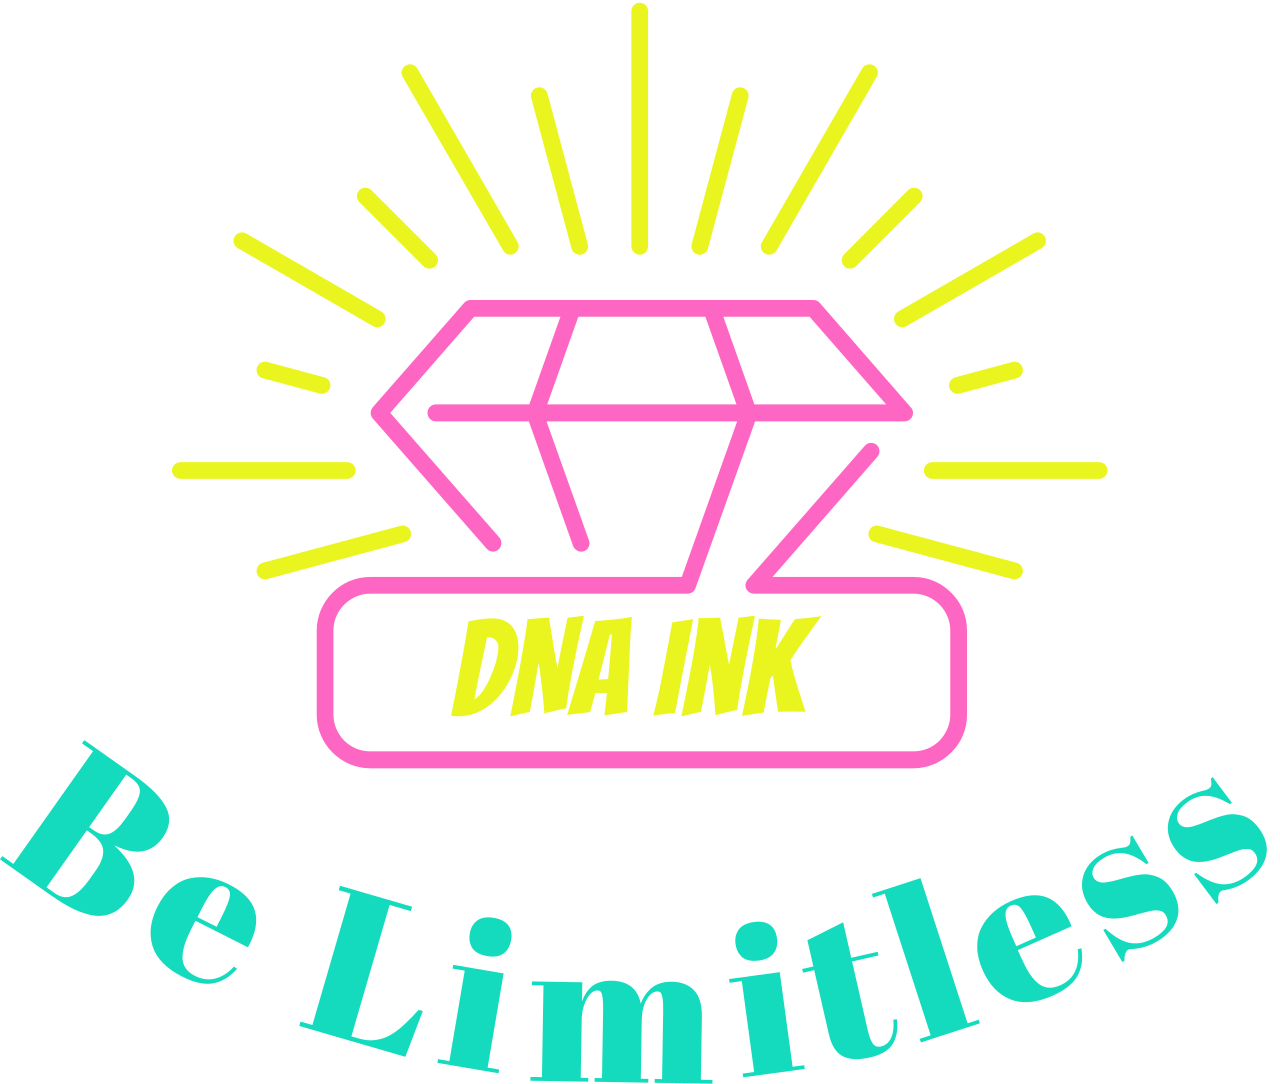 DNA Ink 's web page